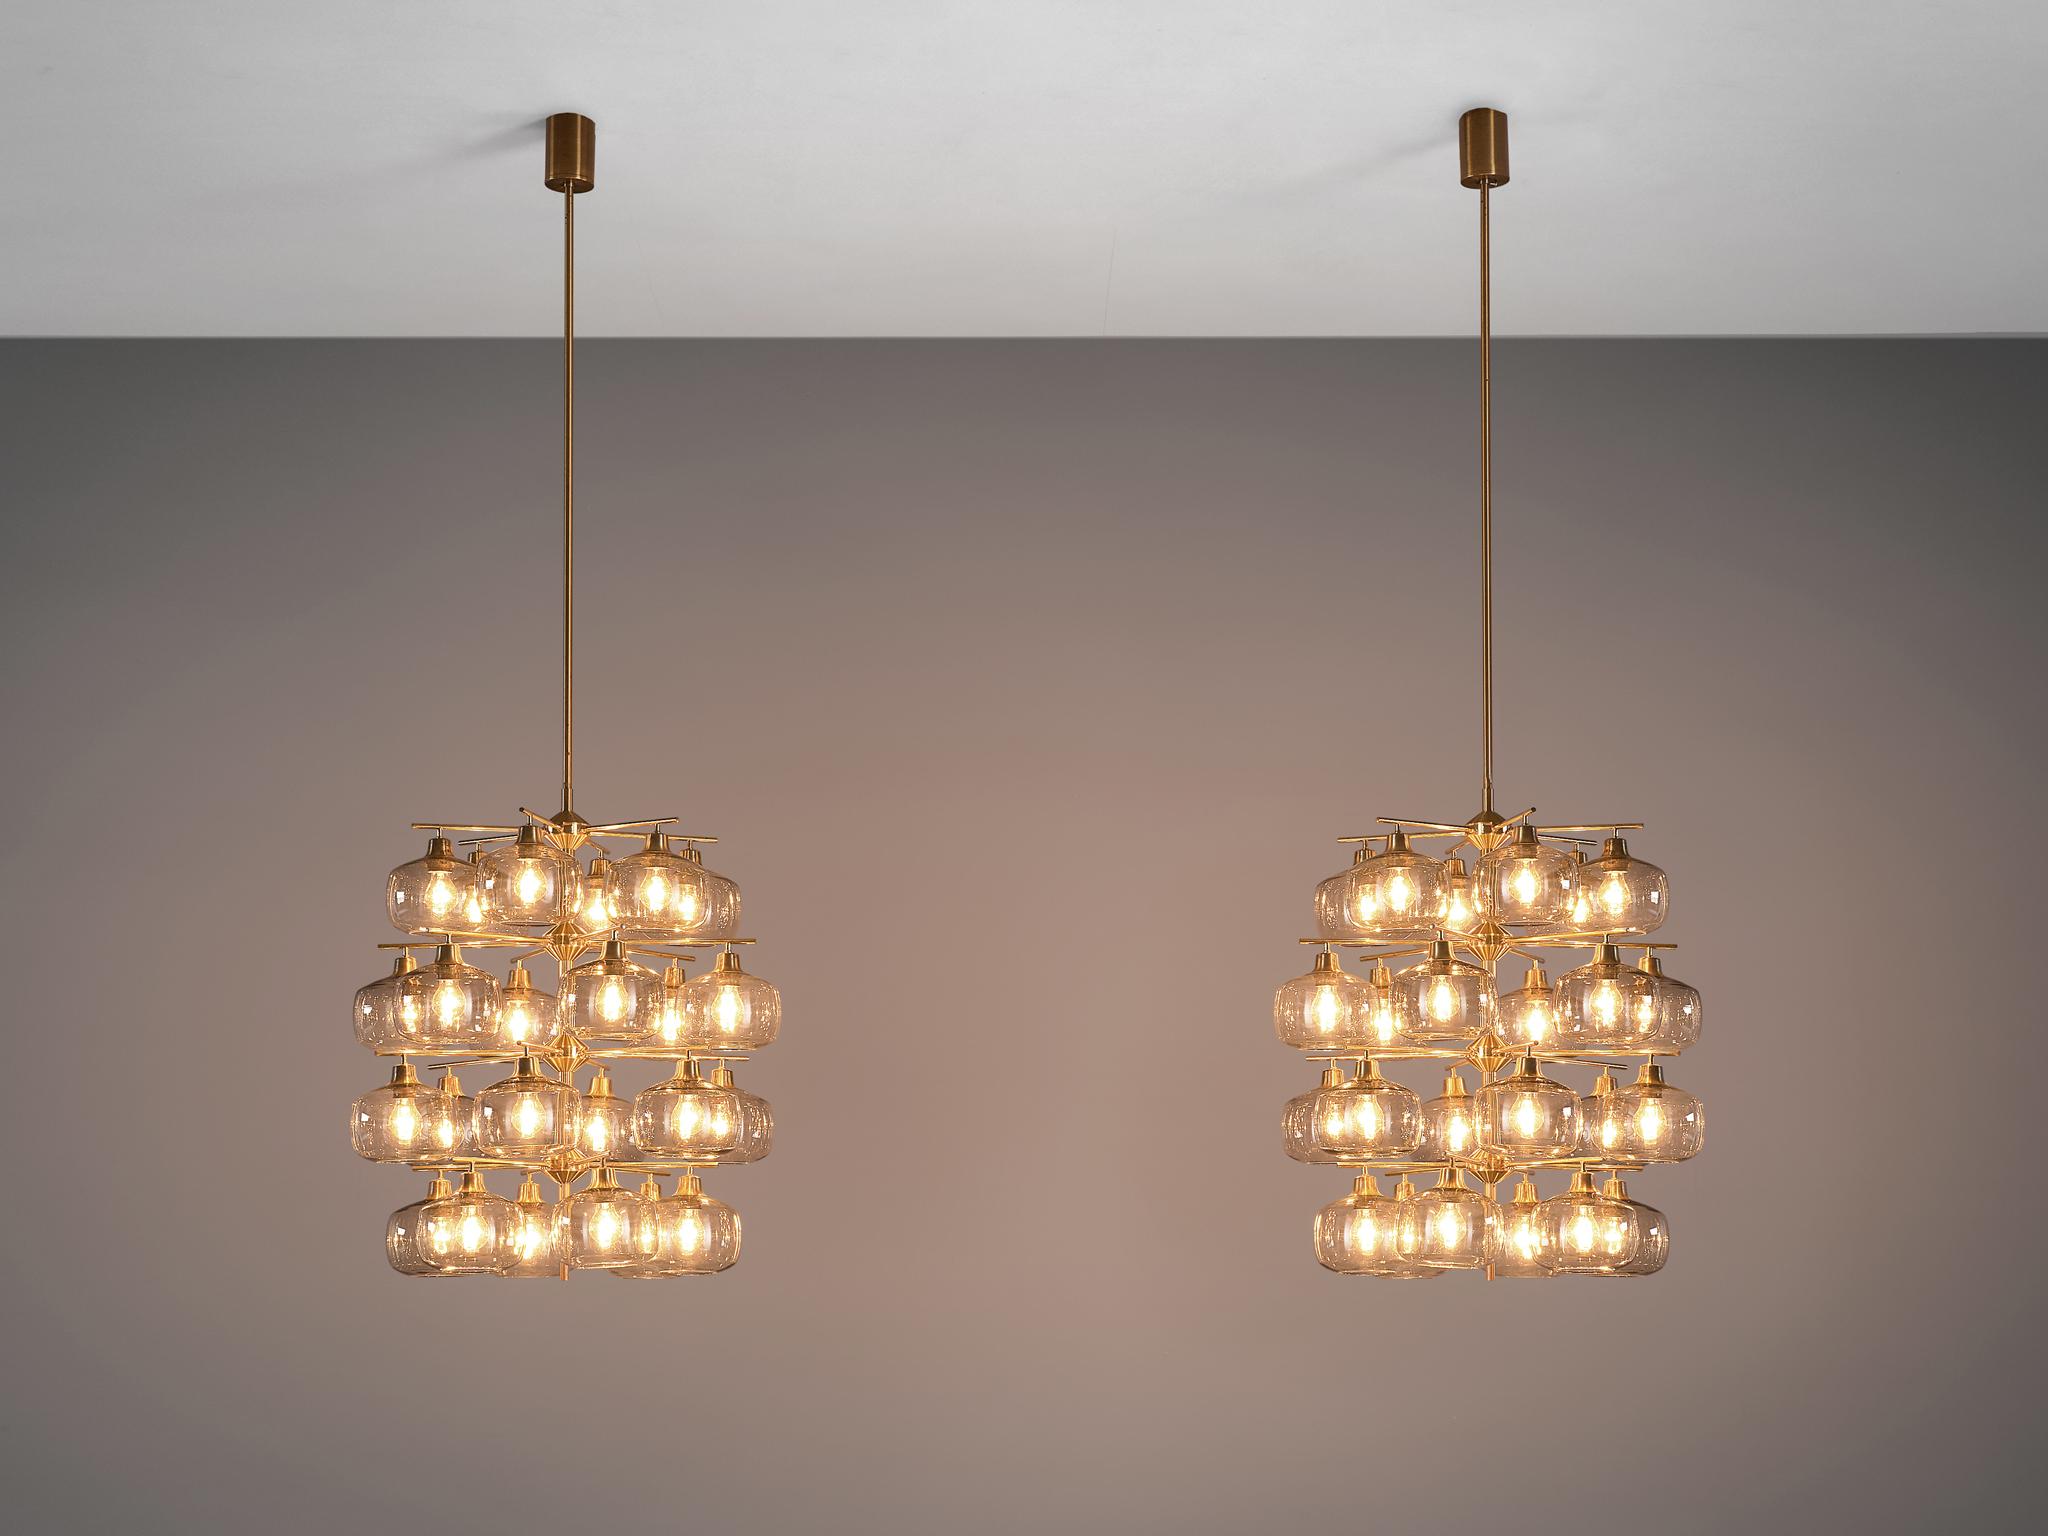 Holger Johansson for Westal, pair of chandeliers, brass, smoked glass, Sweden, 1952. Measures: 2mtr/82.5in high.

This exceptional chandelier by Holger Johansson is rare in its kind and size. In 1952 the chandelier was custom-made for the